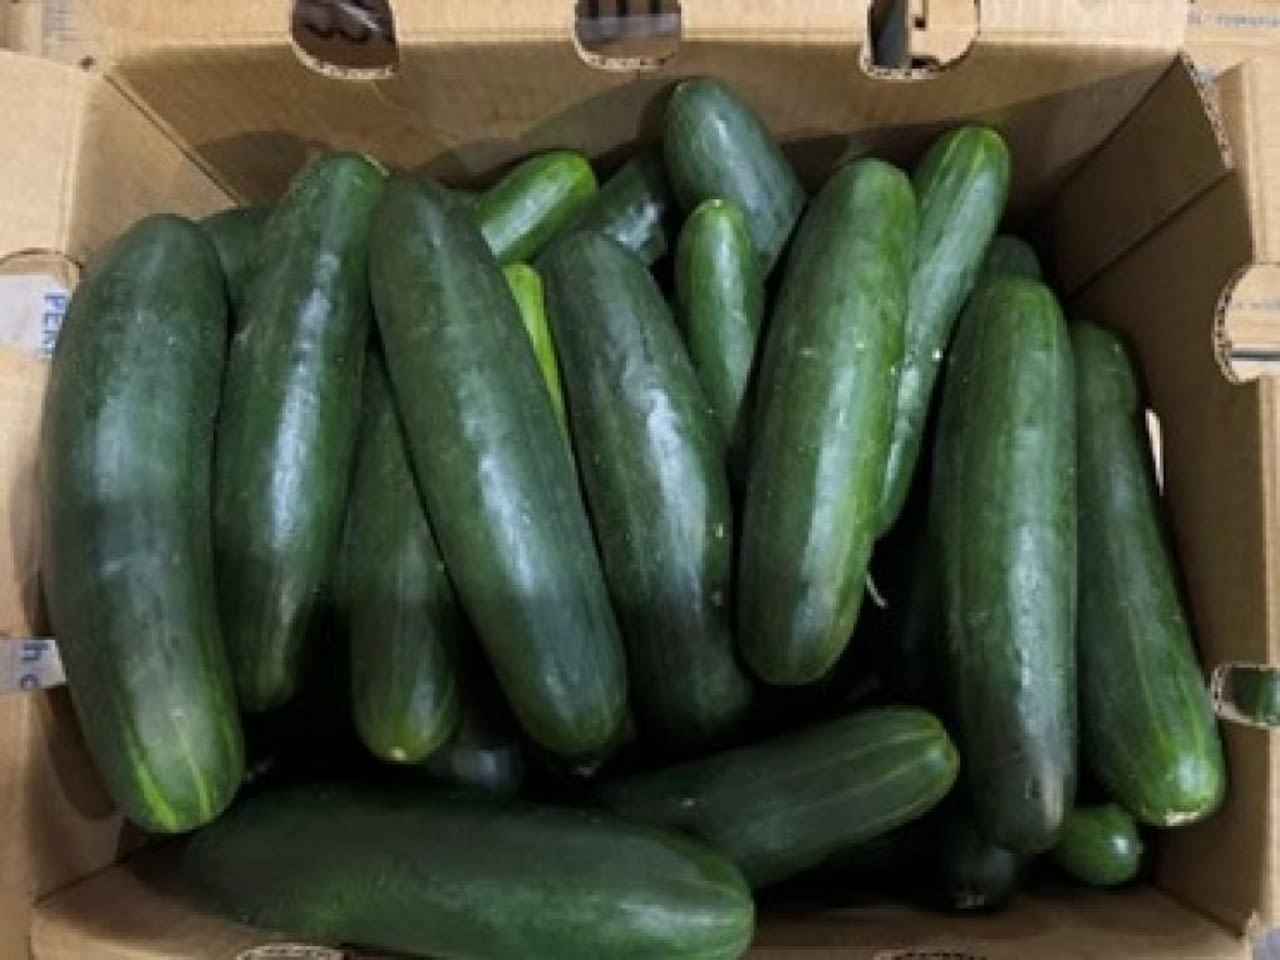 Cucumber recall: Produce sold in 14 states, including Alabama